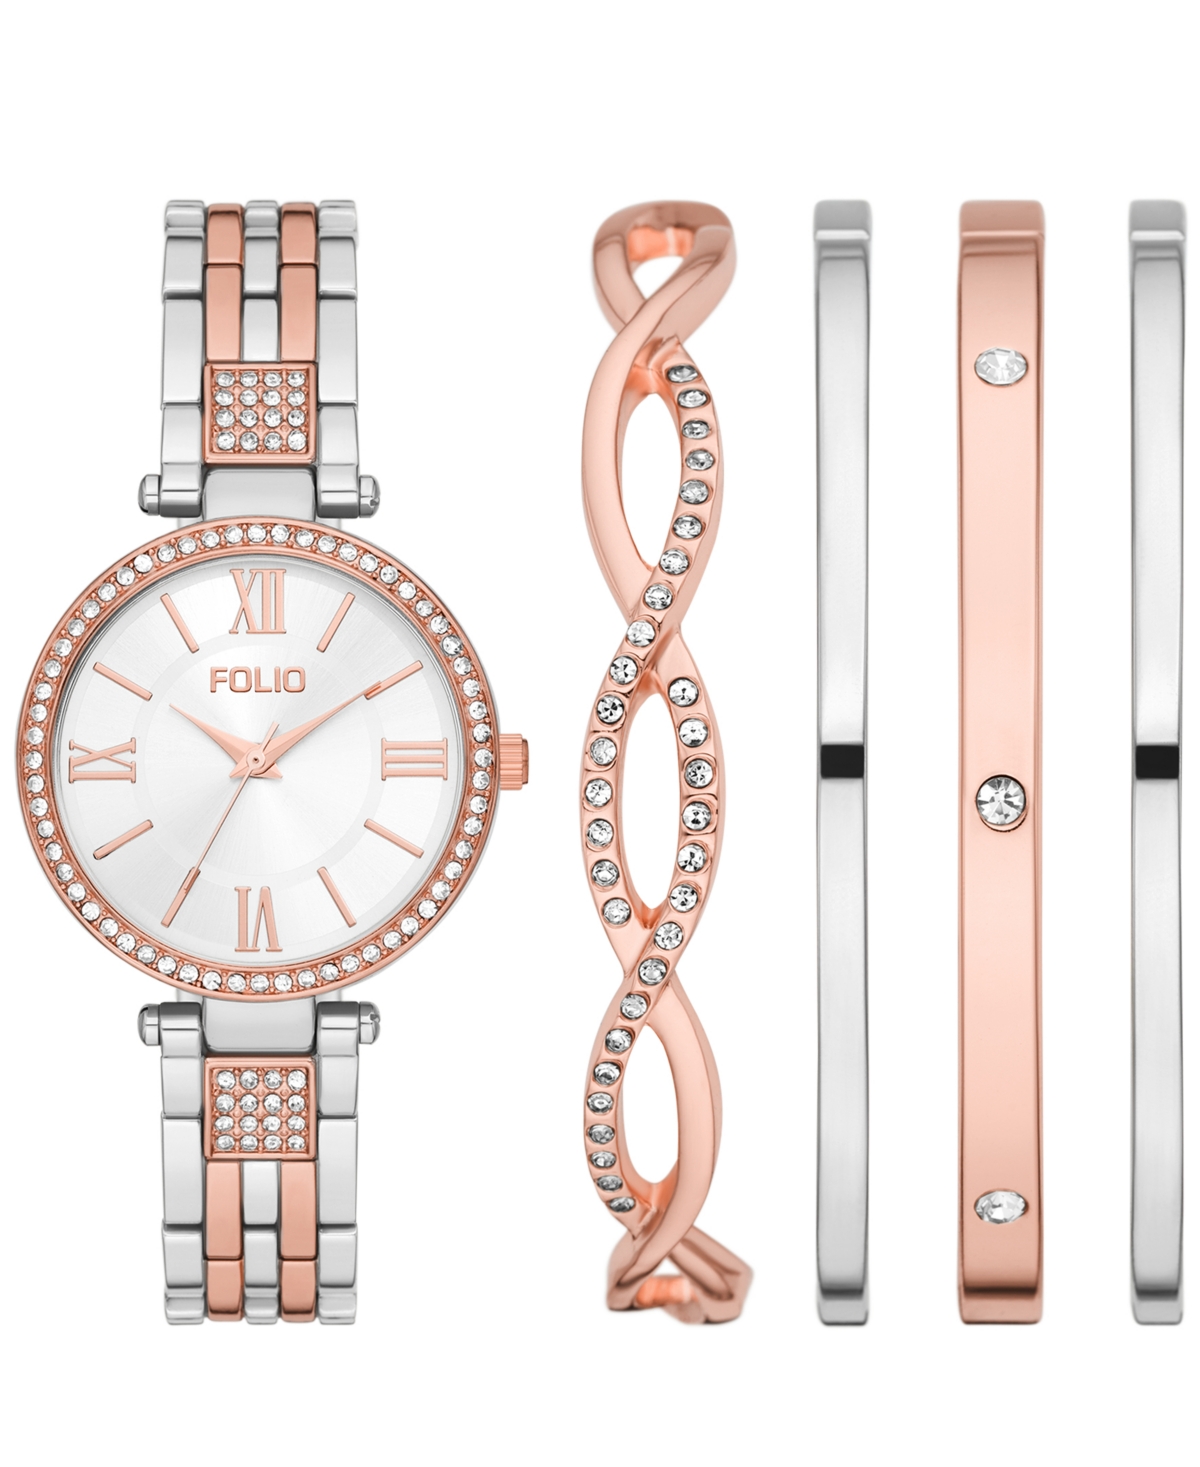 Folio Women's Three Hand Two-tone 34mm Watch And Bracelet Gift Set, 5 Pieces In Two Tone